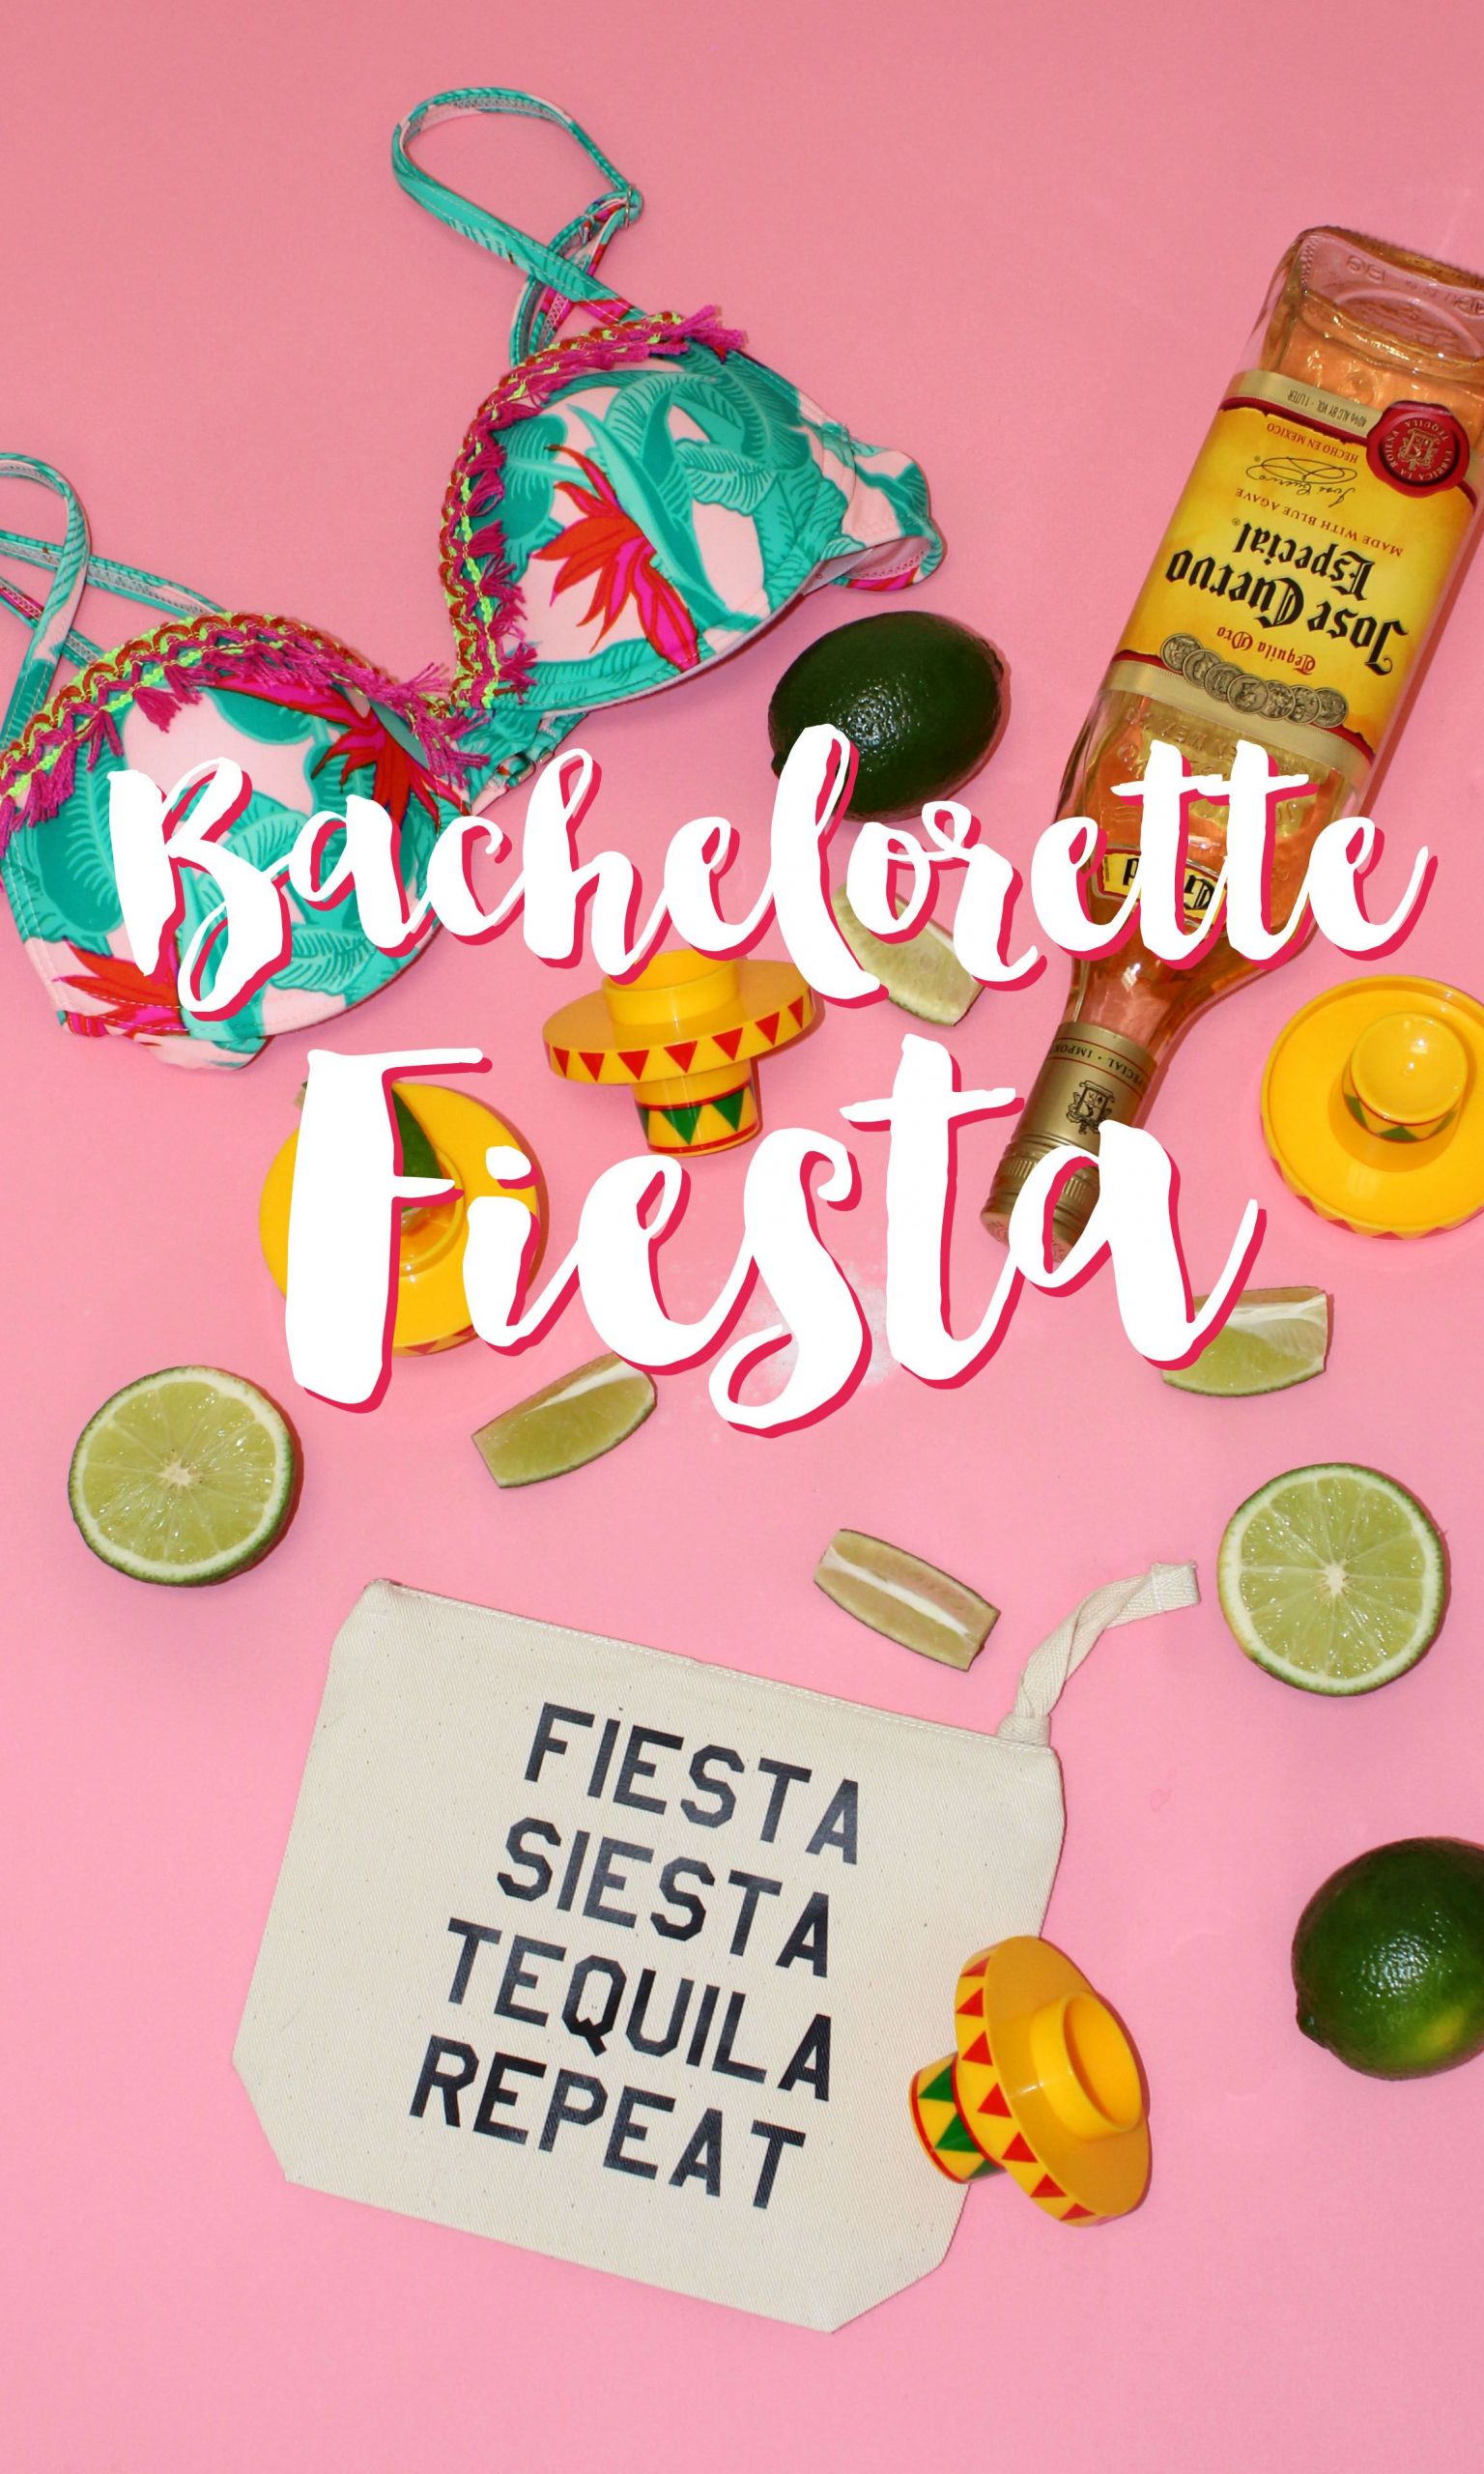 Mexico Bachelorette Party Ideas
 How to throw a fiesta themed bachelorette party